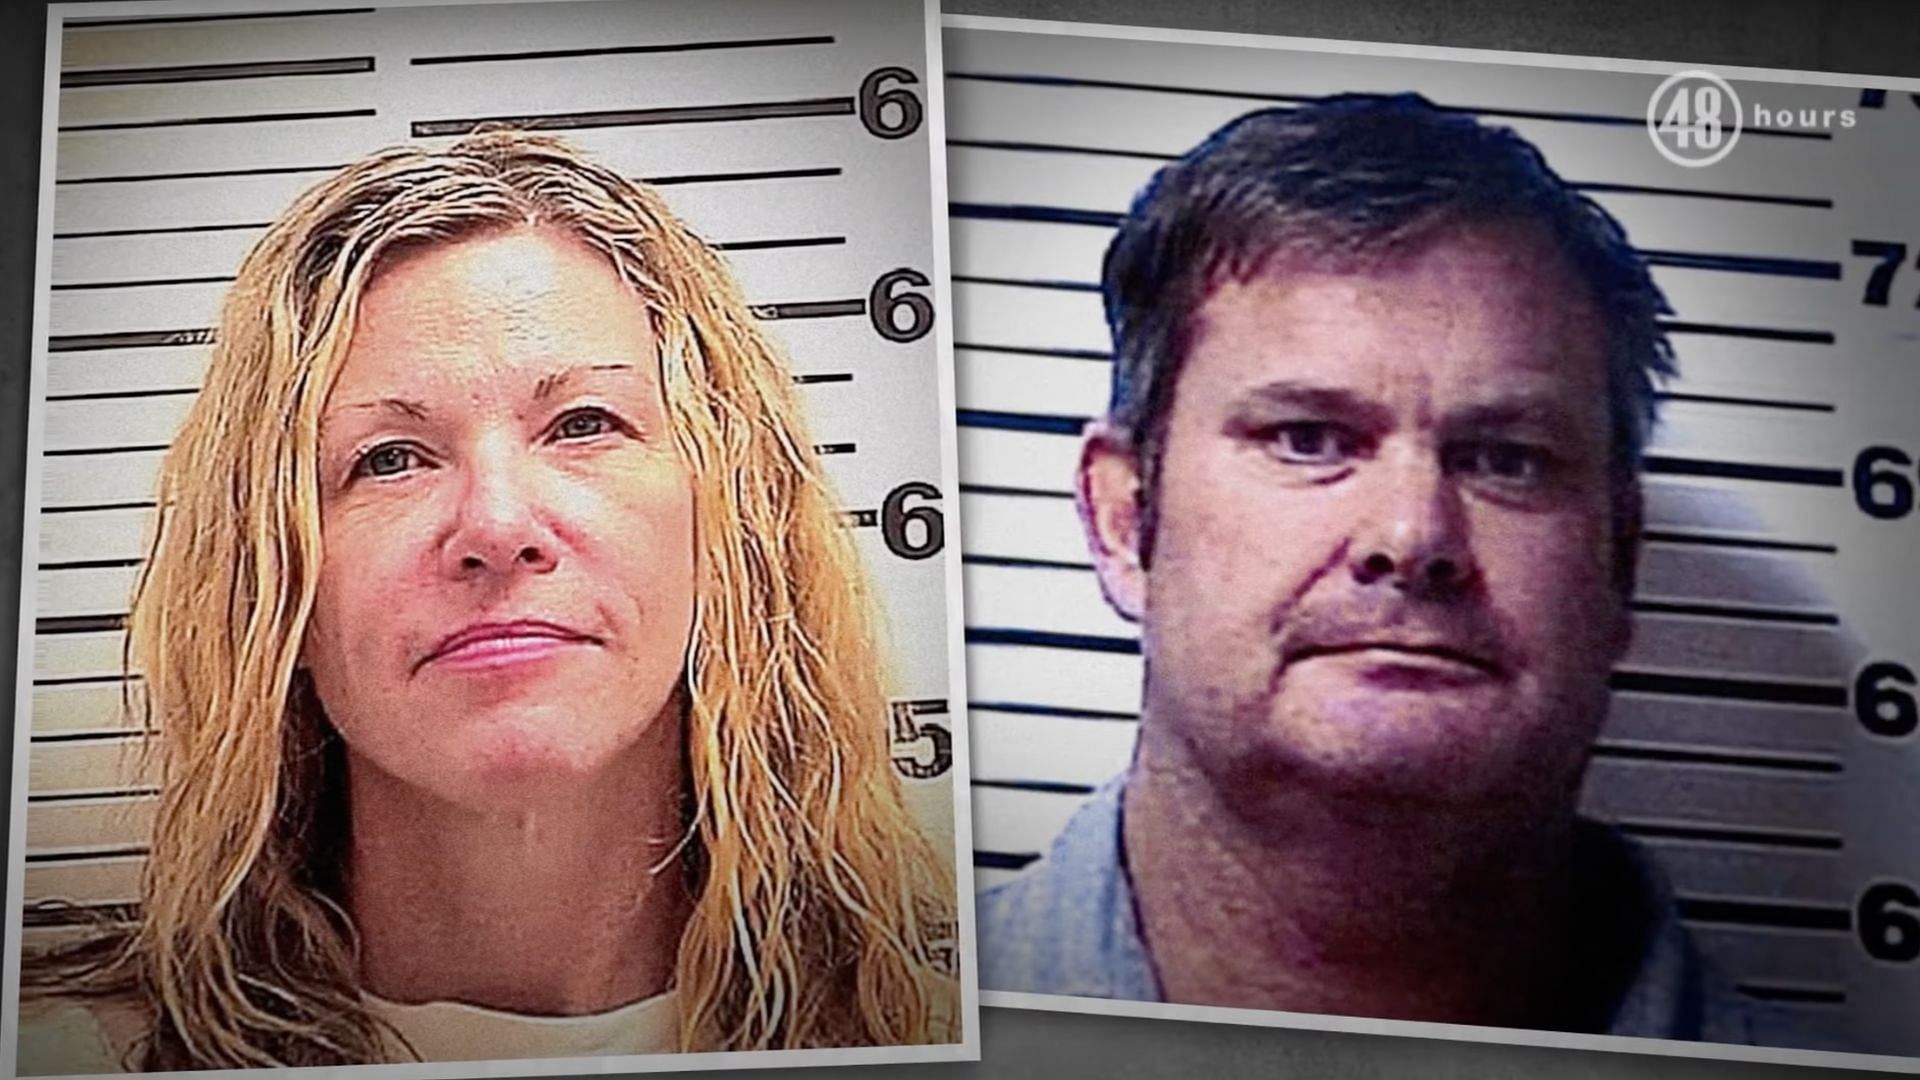 Lori Vallow and Chad Daybell are currently awaiting their respective trials from behind bars in Idaho (Image via 48 Hours/YouTube)